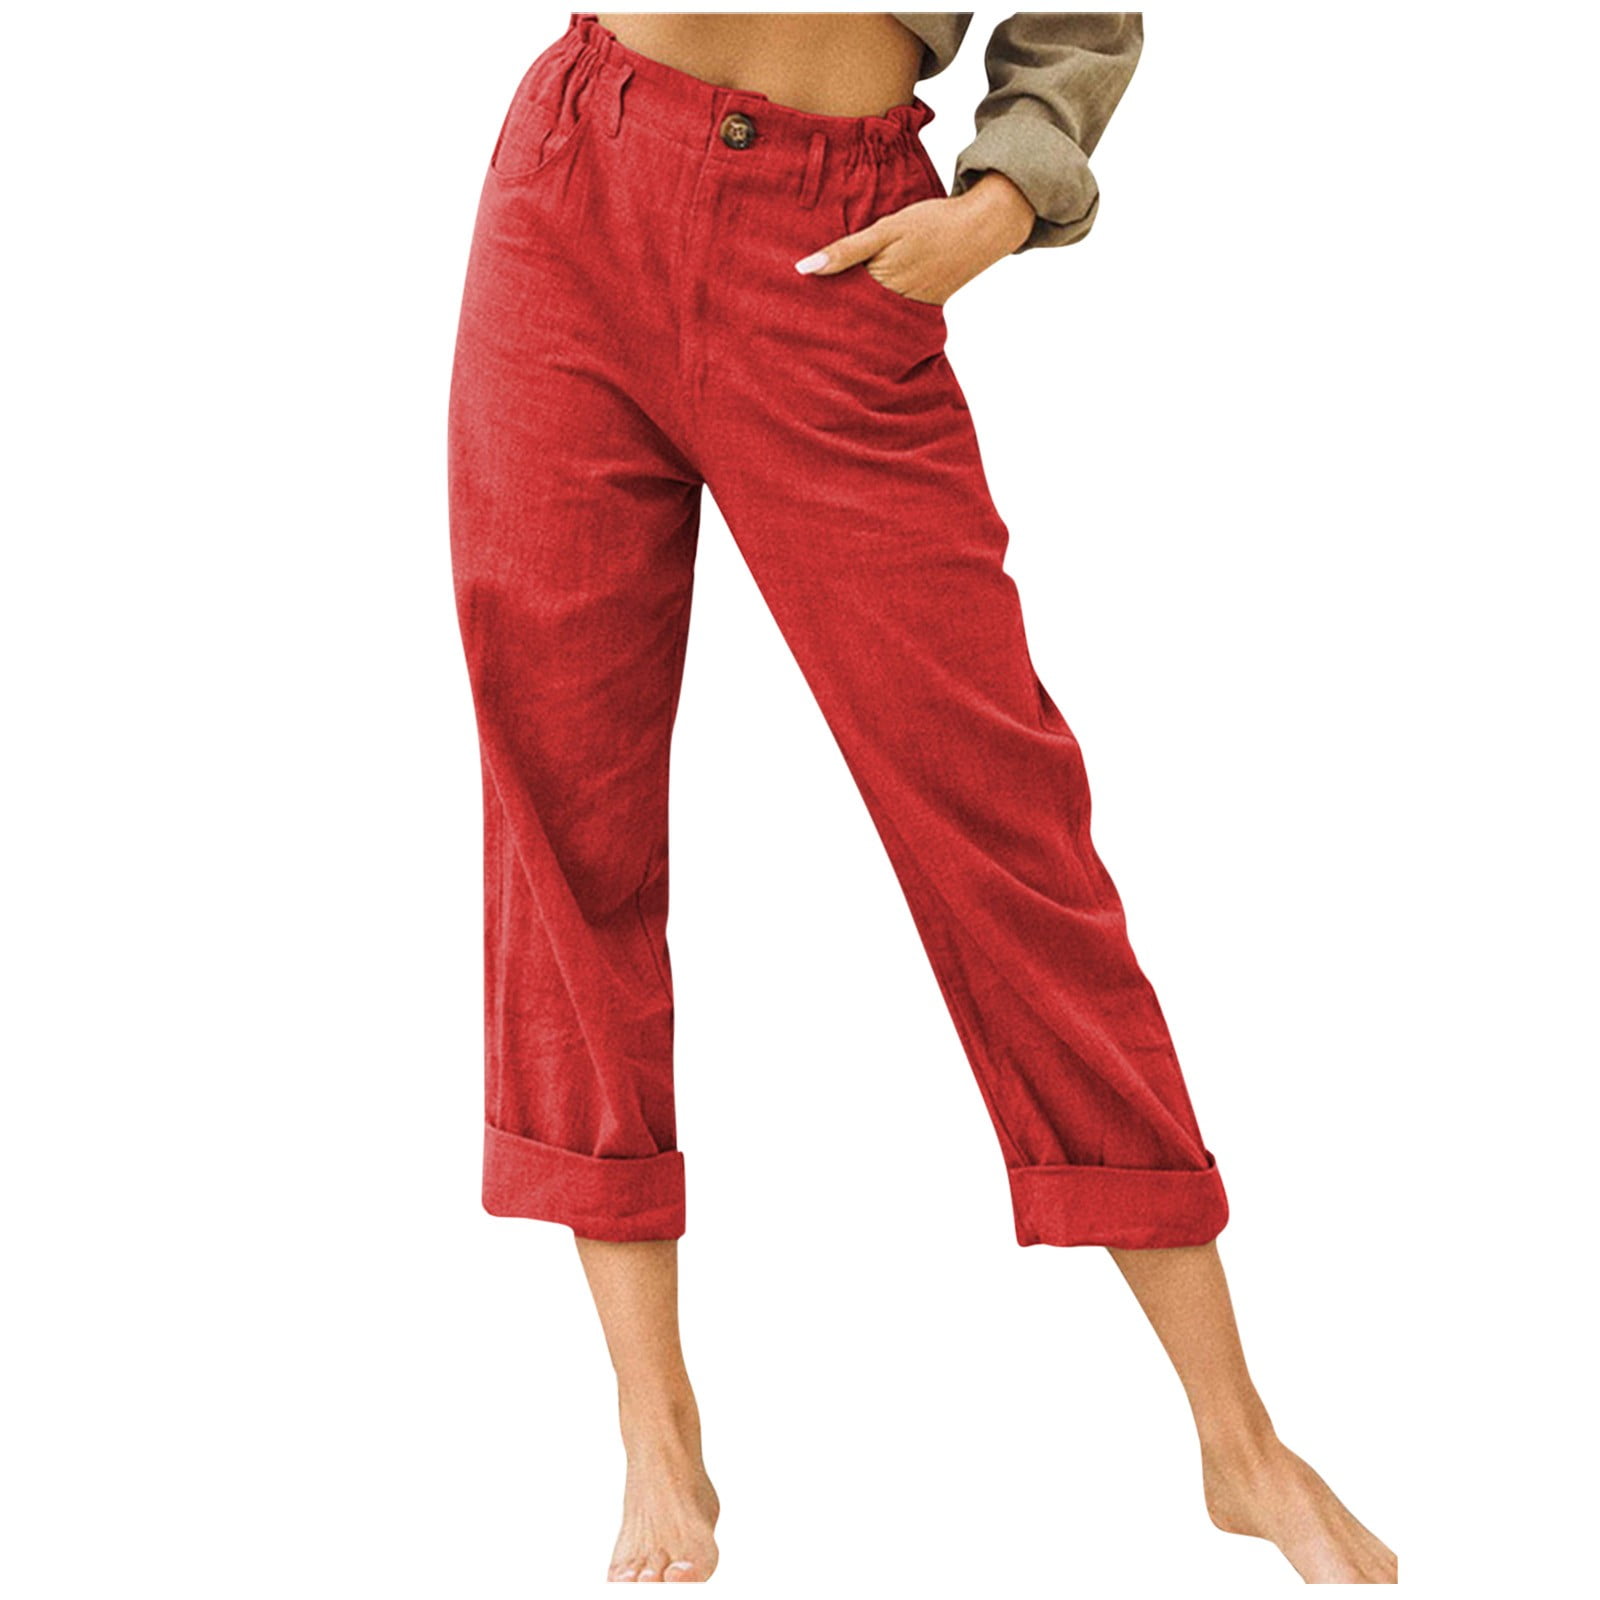 Dadaria Wide Leg Linen Pants for Women Petite Length Solid Color with  Pockets Buttons Elastic Waist Comfortable Straight Pants Wine S,Female 